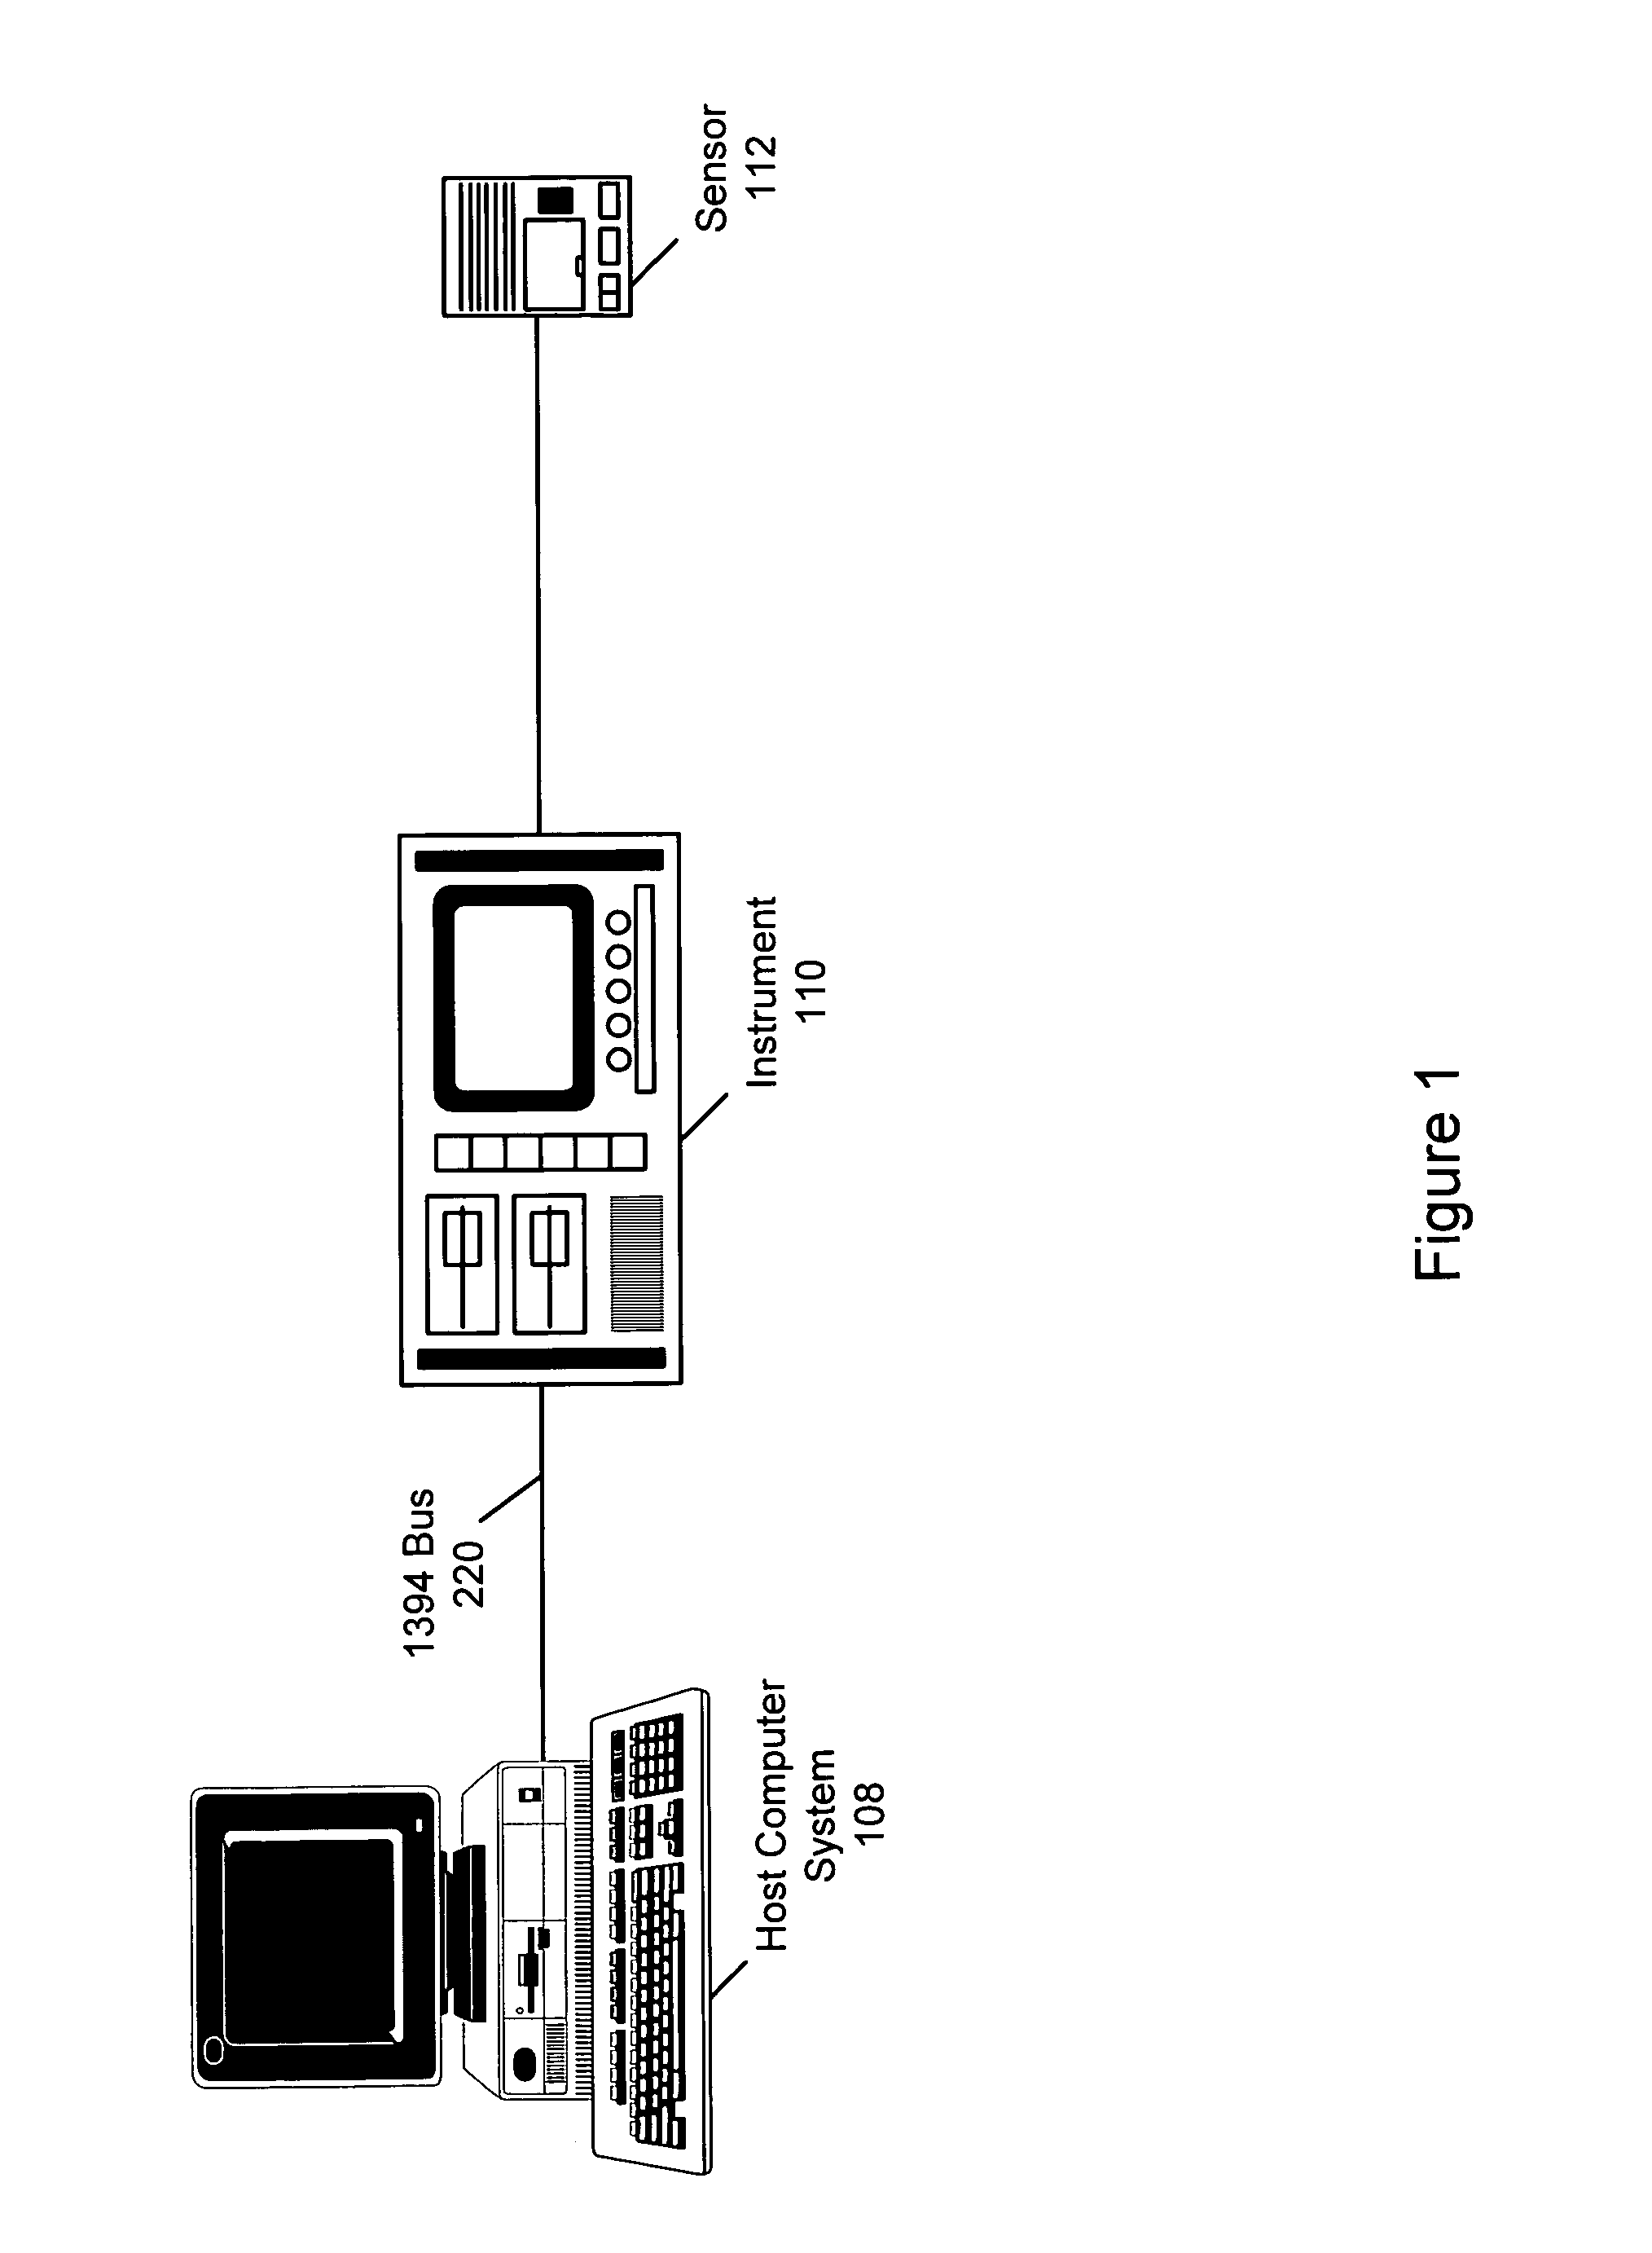 System and method for transferring data over an external transmission medium